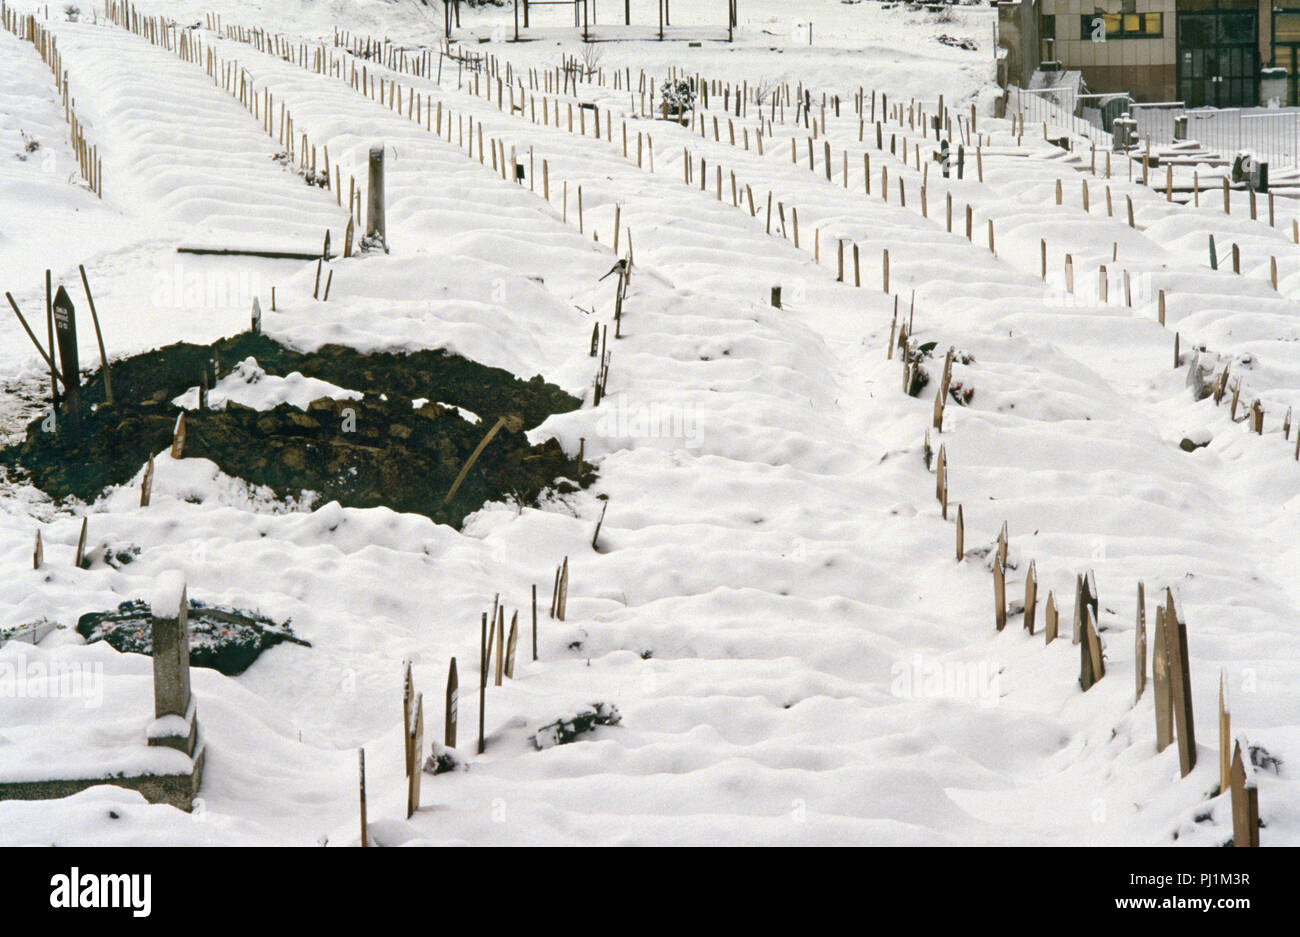 4th March 1993 During the Siege of Sarajevo: a view of part of the Lion Cemetery, just below the Kosevo Hospital. Grave-diggers' shovels stand embedded in freshly dug earth among dozens of regimented wooden grave-markers in the snow. They bear the names of Muslim victims of the siege. Stock Photo